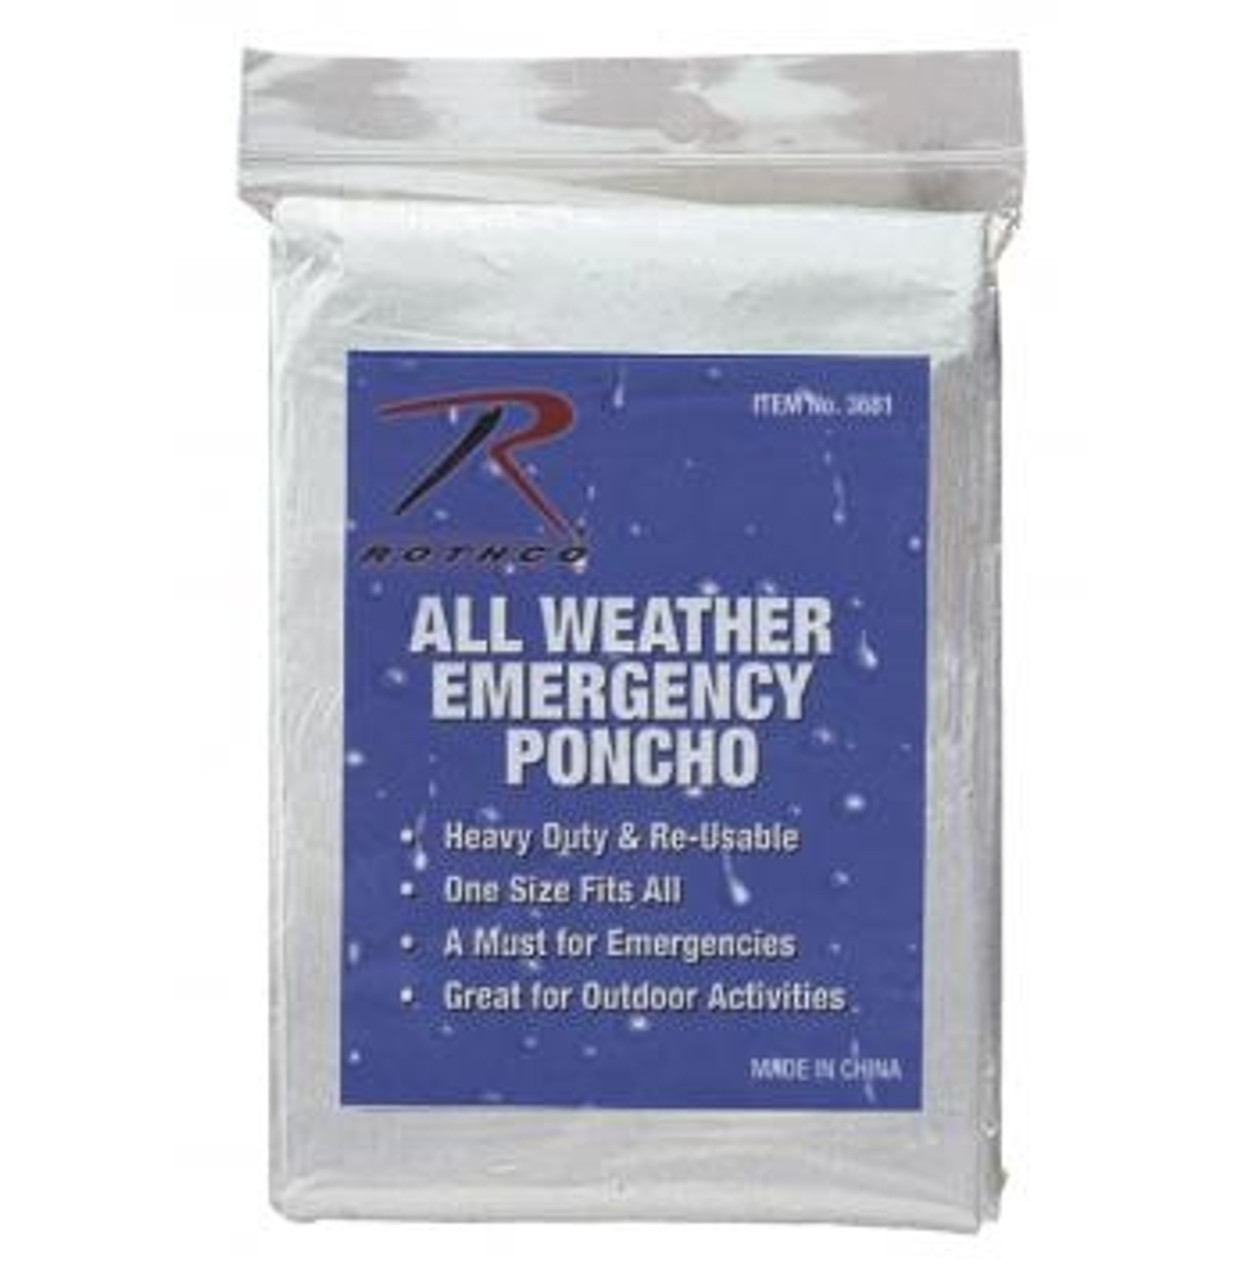 Poncho from Hessen Antique